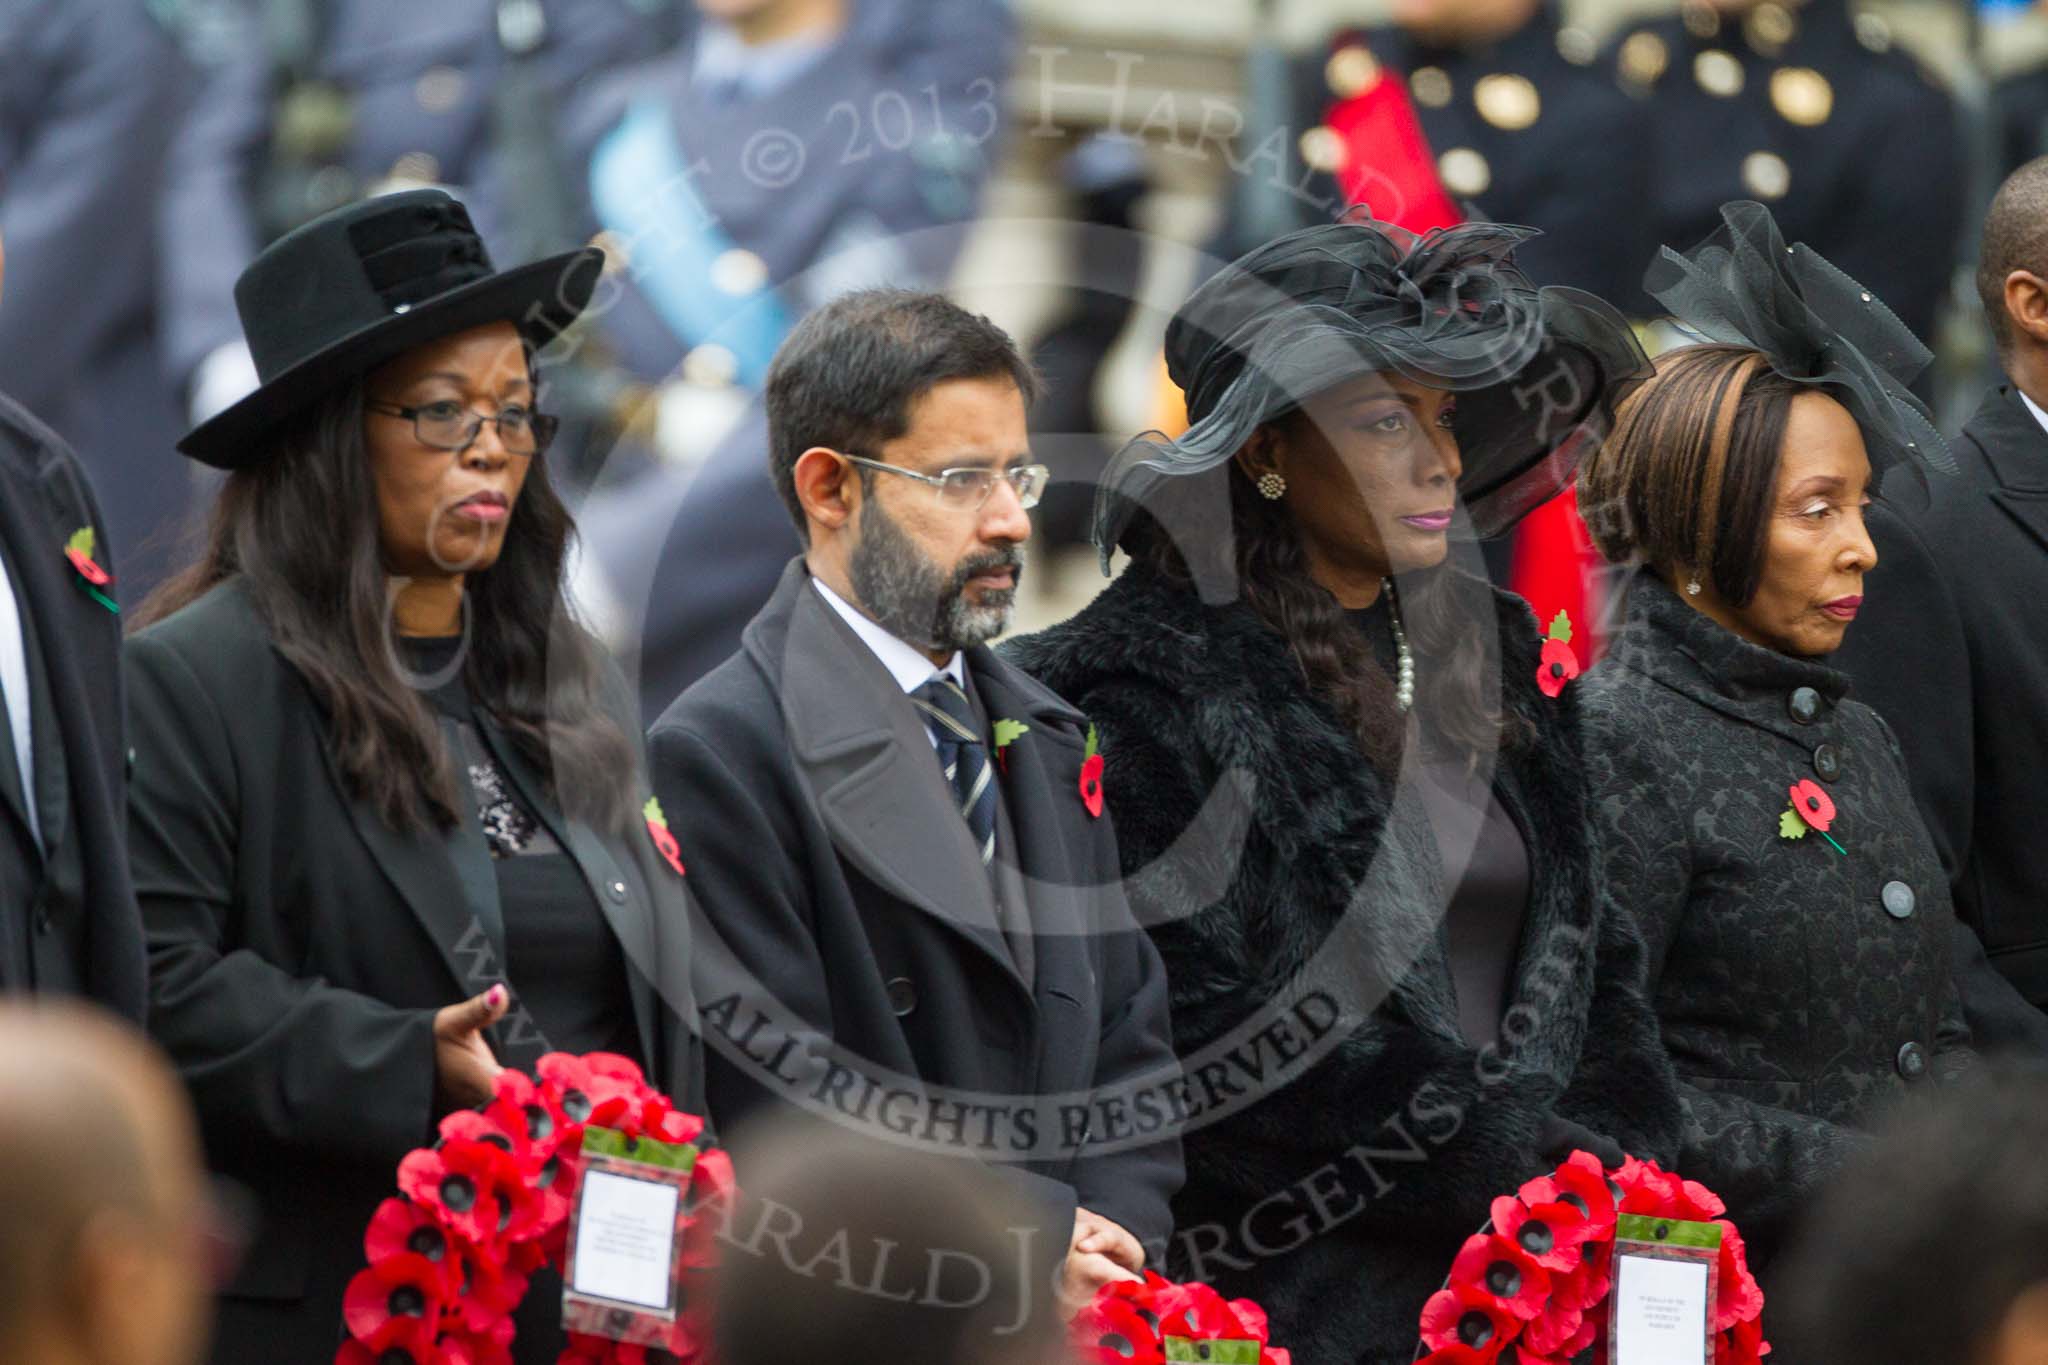 Remembrance Sunday at the Cenotaph 2015: The High Commissioner of Swaziland, the High Commissioner of Mauritius, the Deputy High Commissioner of Barbados and the High Commissioner of Lesotho with their wreaths at the Cenotaph. Image #118, 08 November 2015 10:57 Whitehall, London, UK